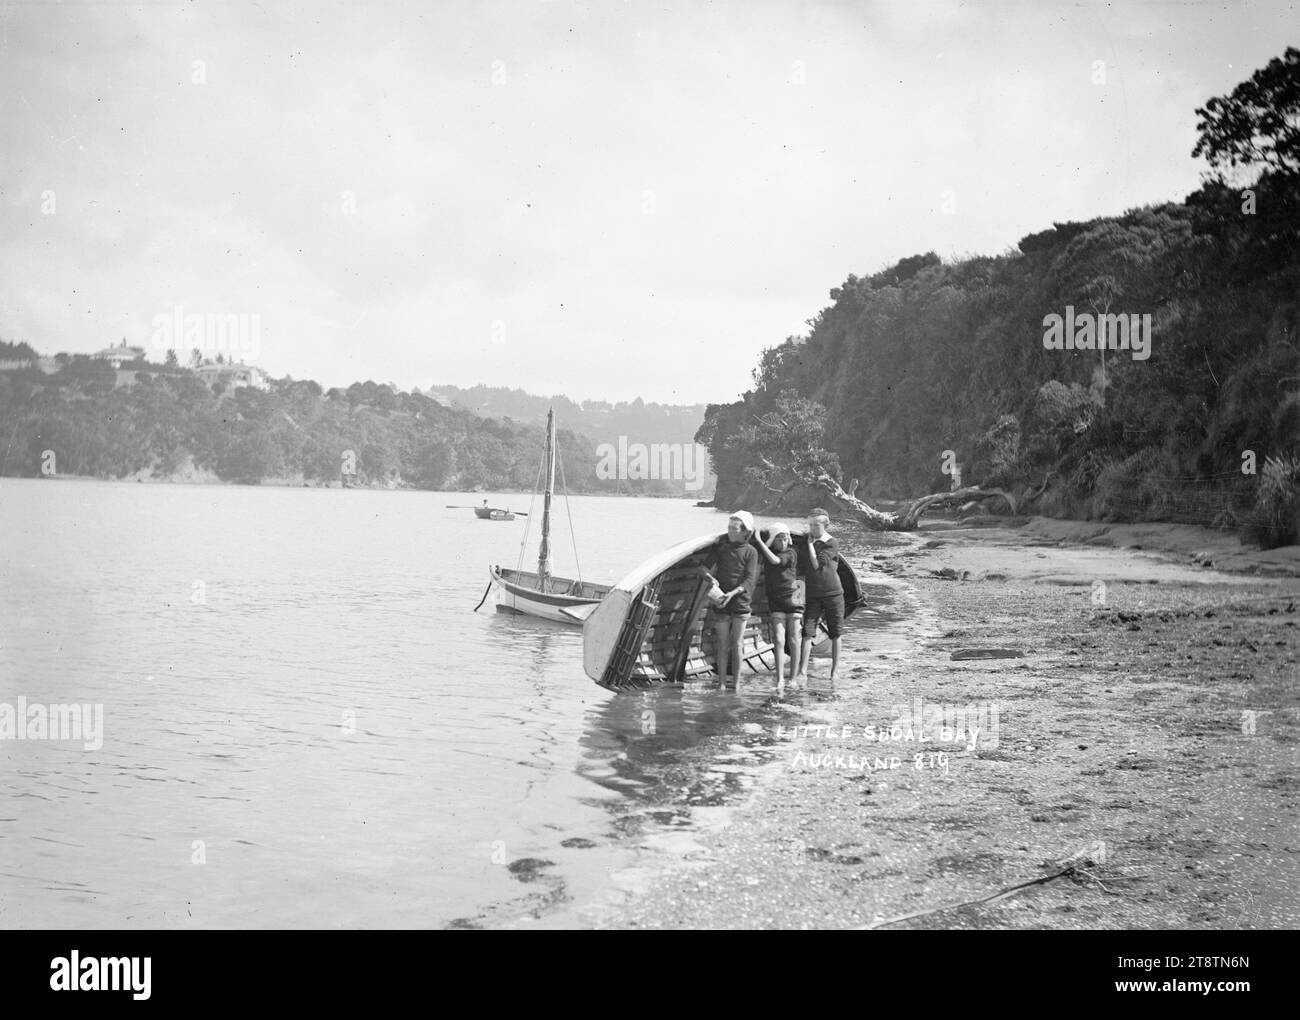 Boys with a dinghy at Little Shoal Bay, Auckland, New Zealand, Three boys holding a dinghy on its side at the water's edge in Little Shoal Bay, Northcote. Anchored nearby is a small sailing boat. Further off-shore is a man rowing a dinghy. in early 1900s Stock Photo